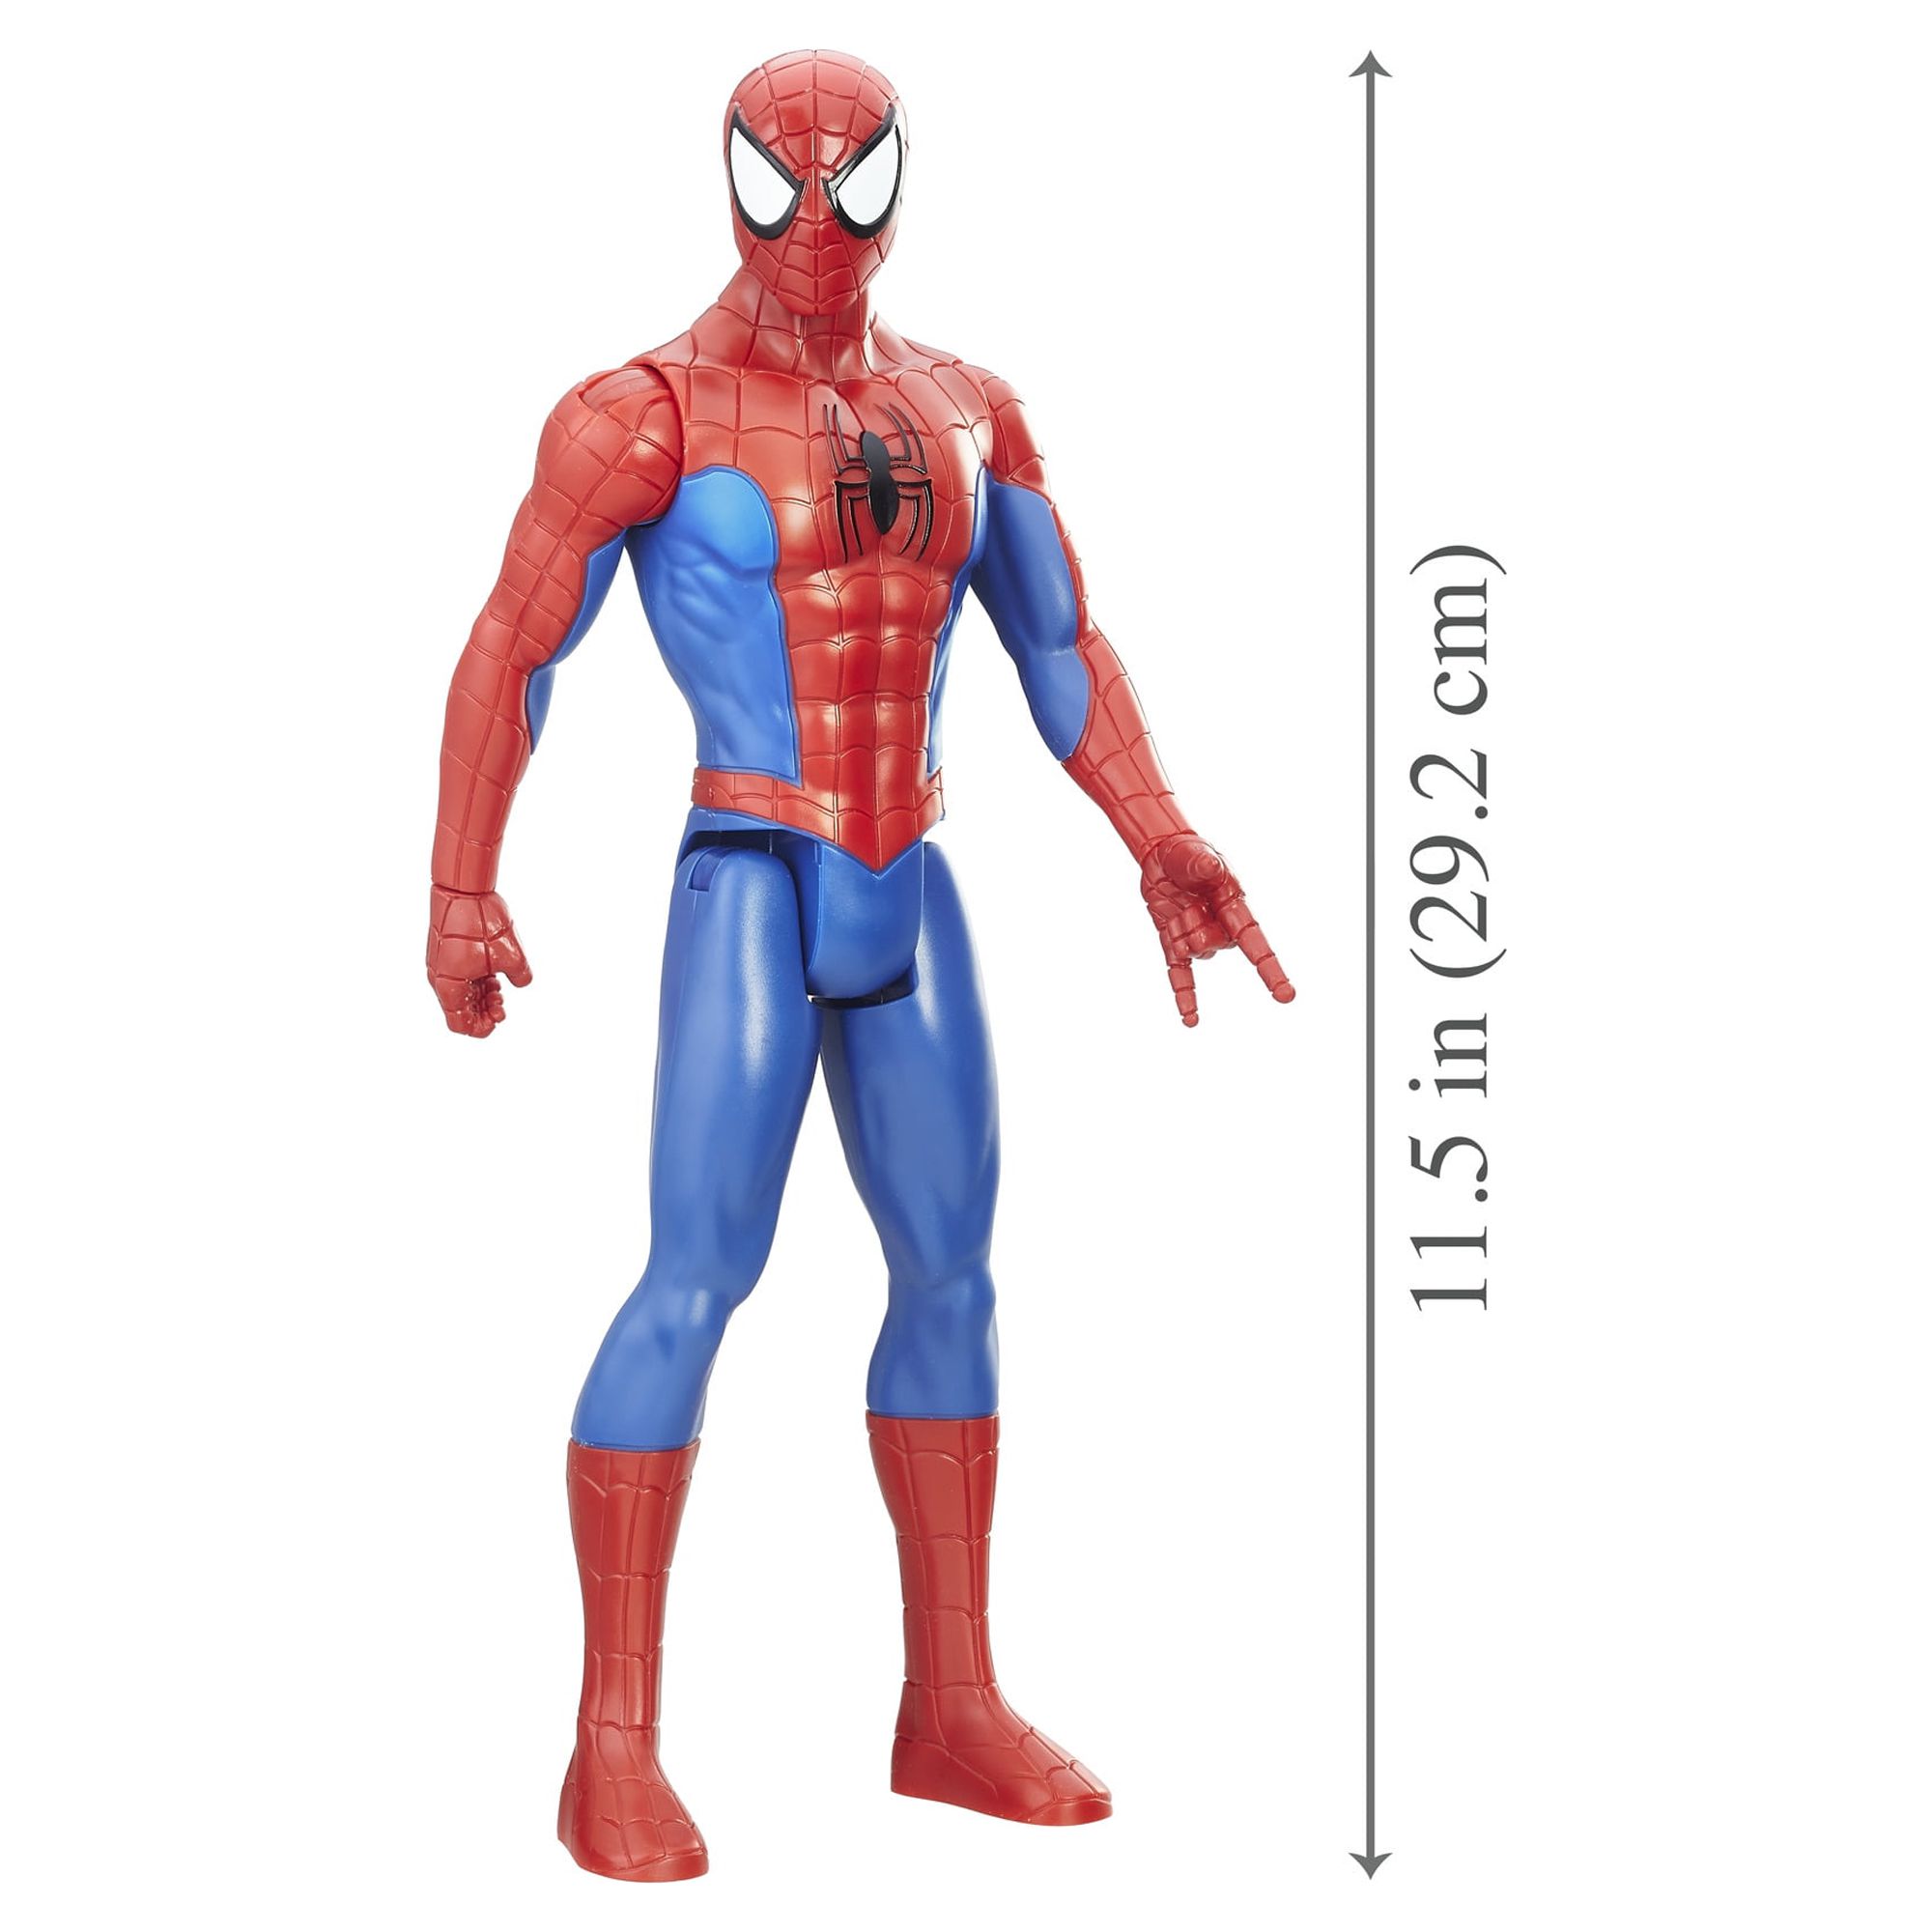 Marvel Spiderman: Titan Hero Series Spiderman Kids Toy Action Figure for Boys and Girls (13”) - image 3 of 16